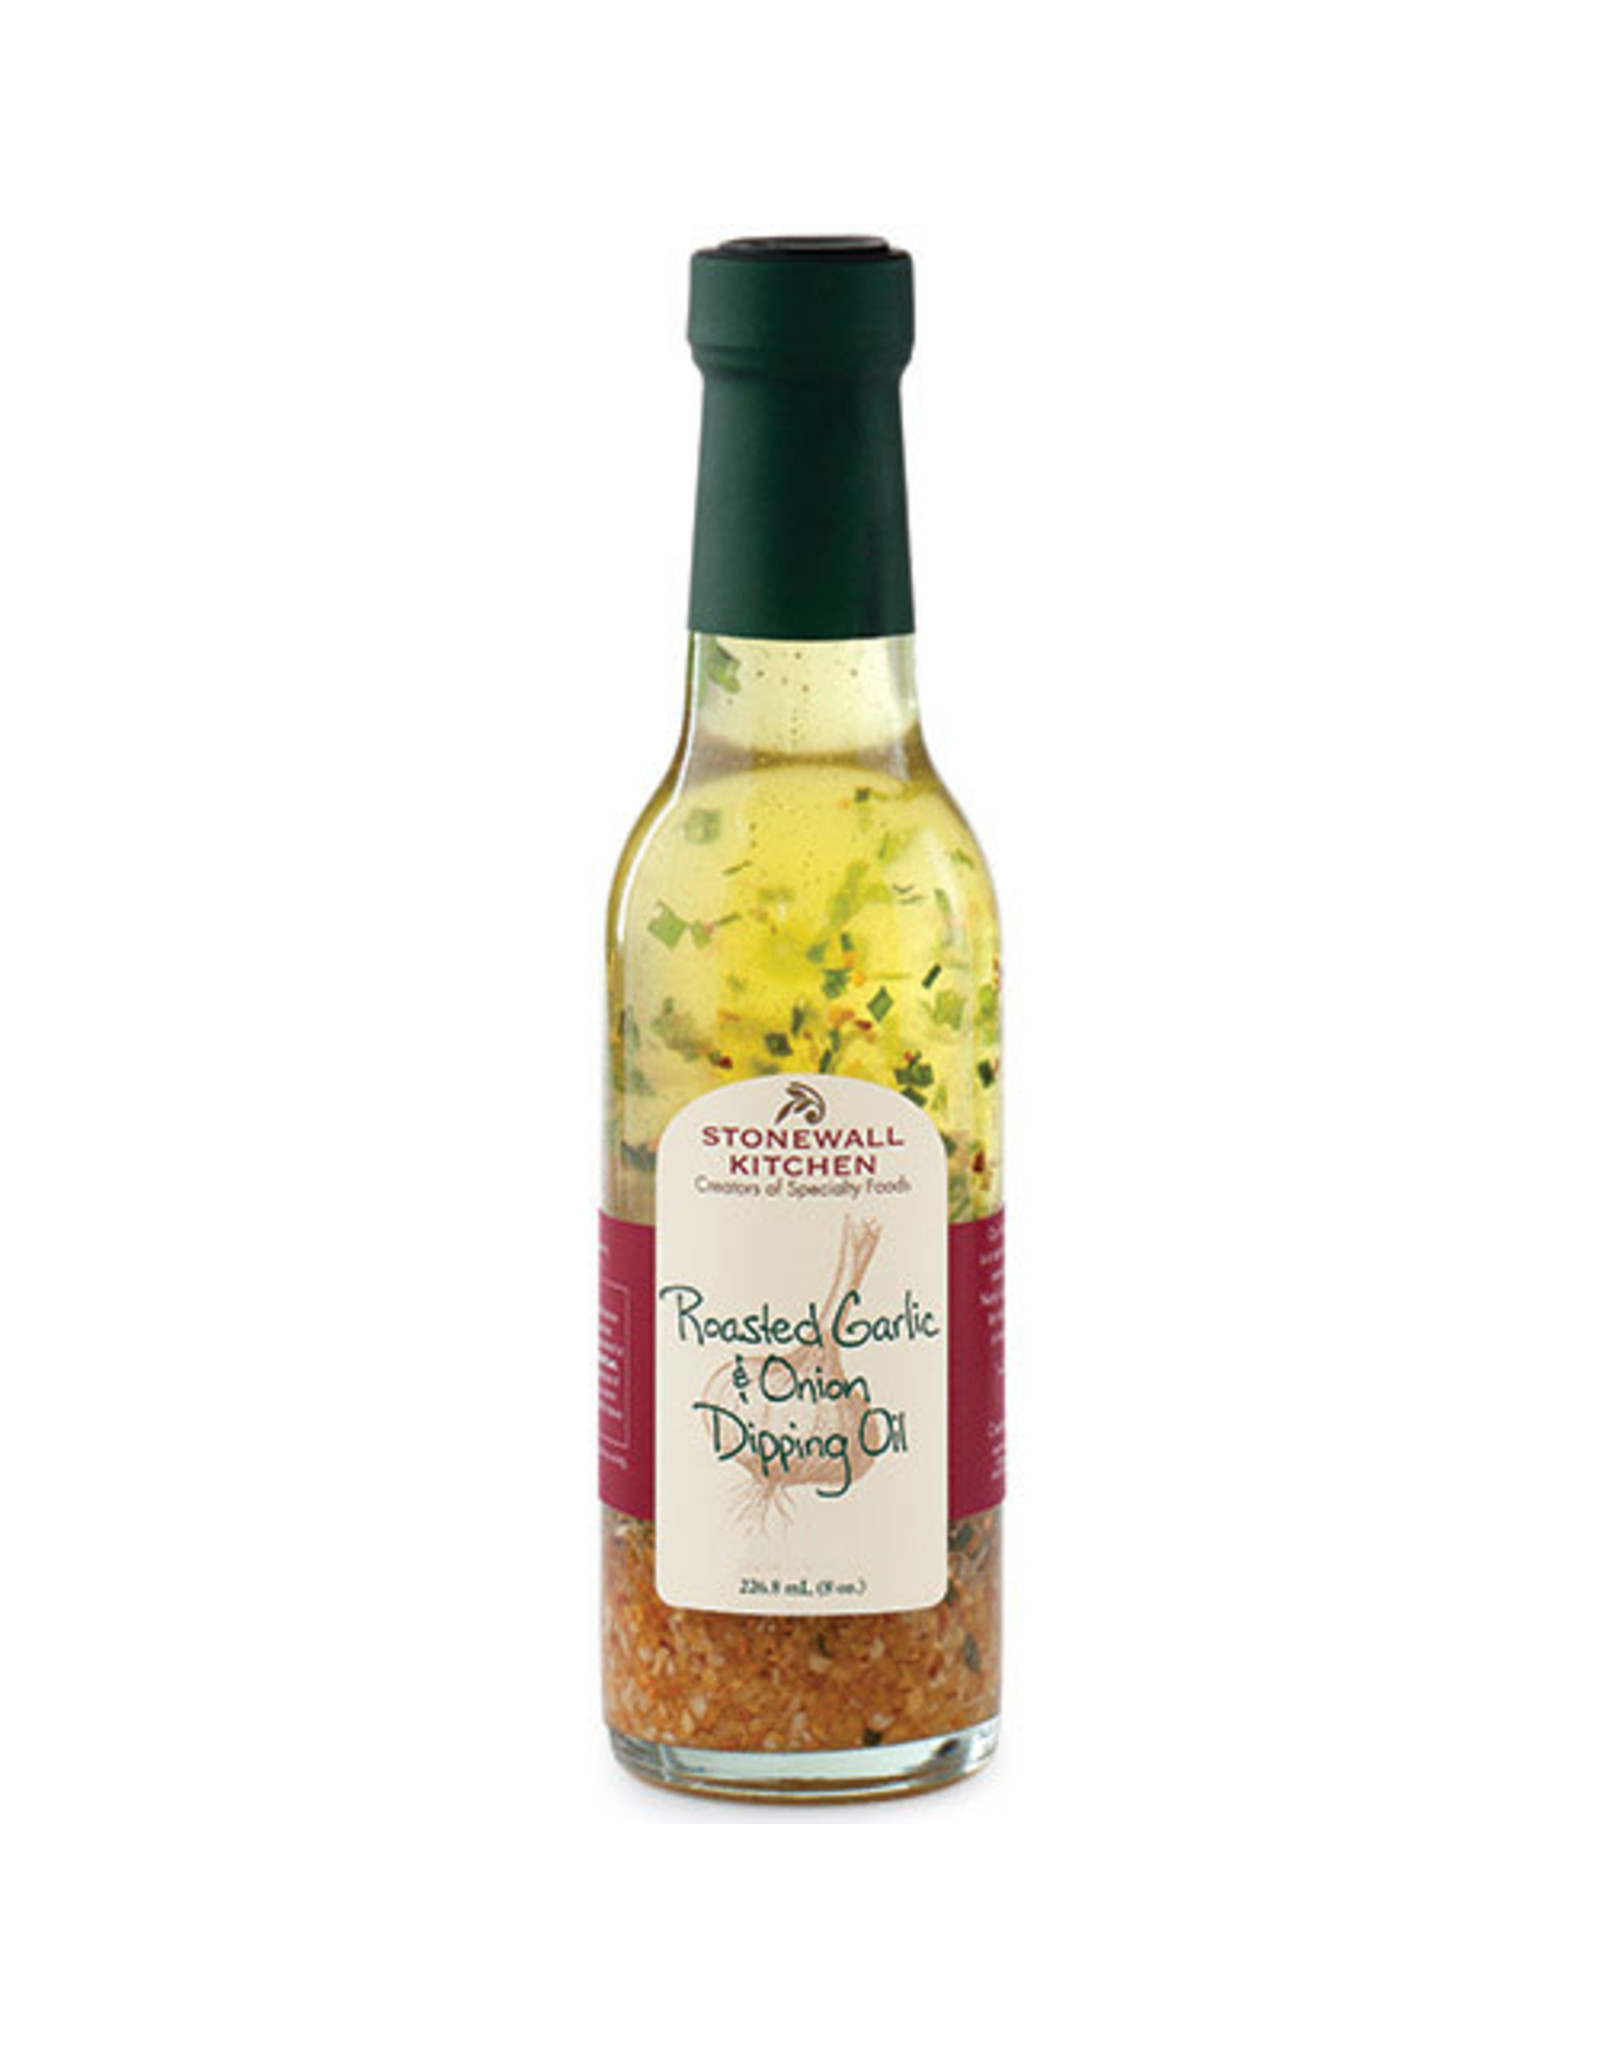 STONEWALL KITCHEN ROASTED GARLIC & ONION DIPPING OIL